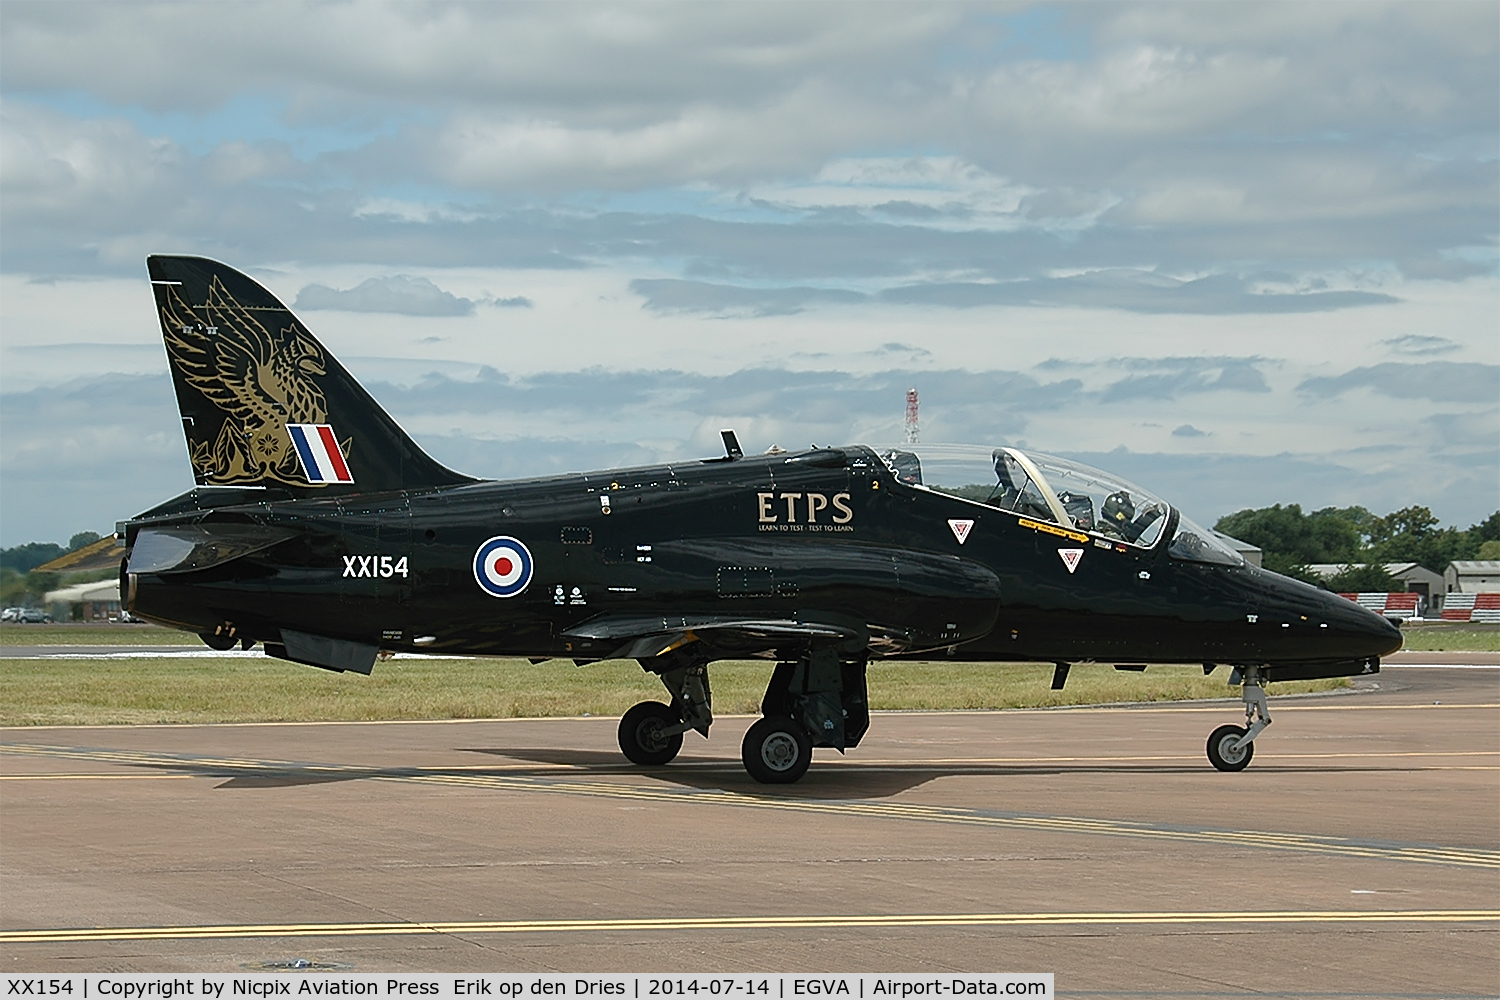 XX154, 1974 Hawker Siddeley Hawk T.1 C/N 001/312001, XX154 is a Hawk T1 assigned to the ETPS and not often to be seen.